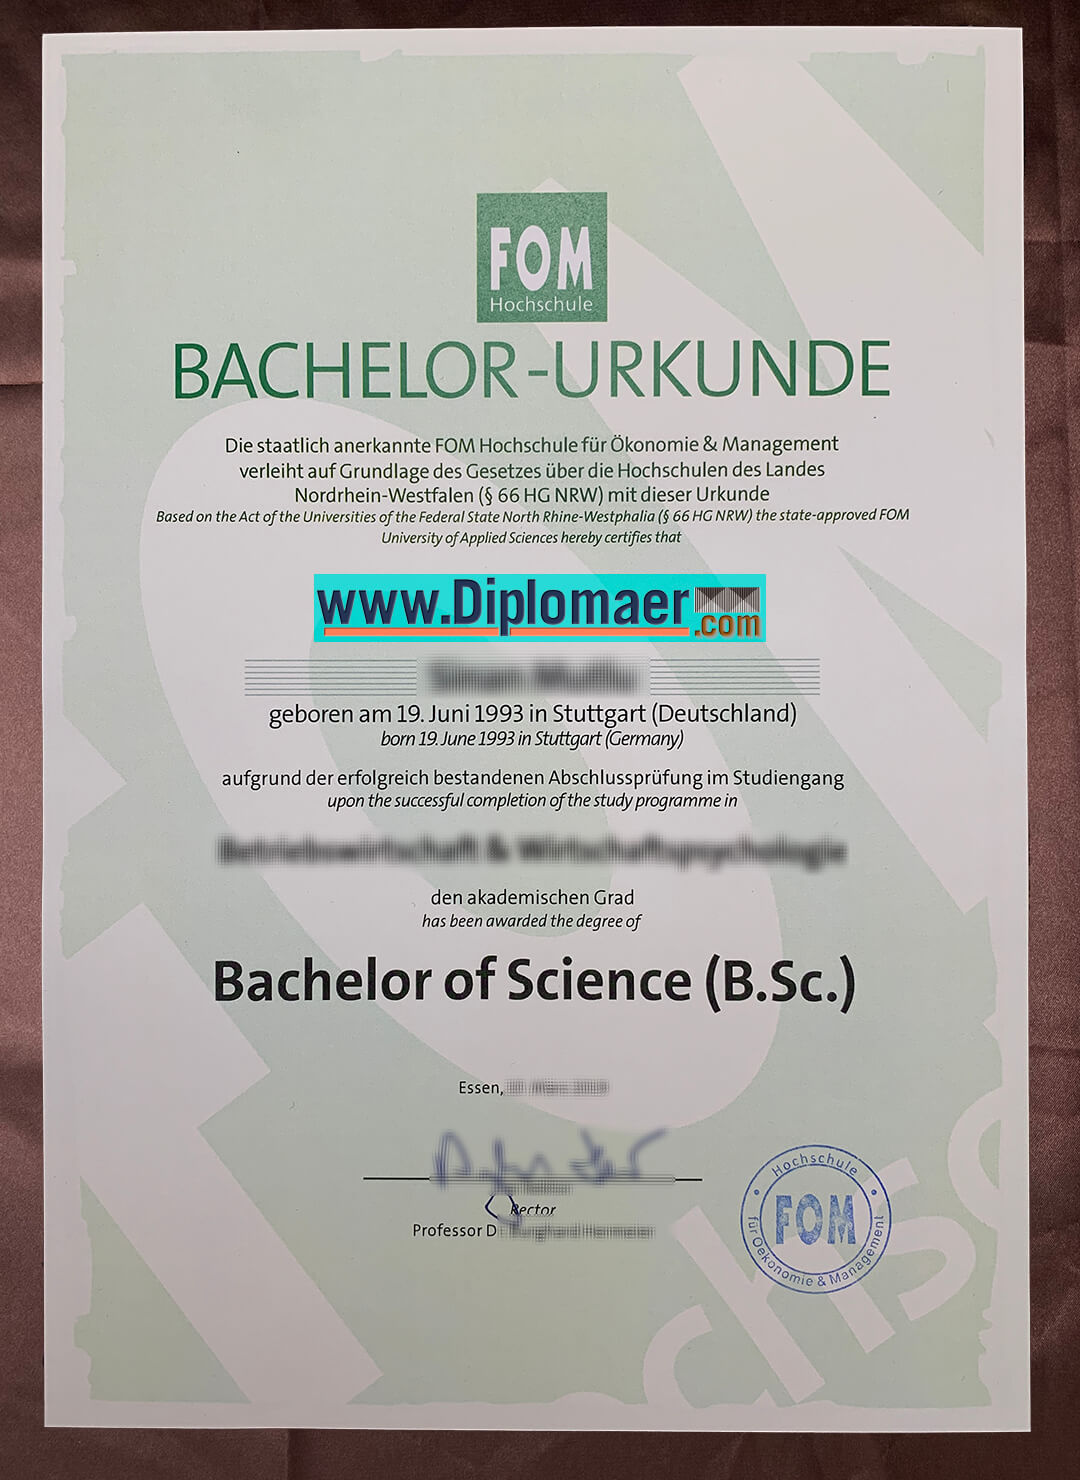 FOM Fake Diploma - How much does it cost to buy a fake degree from Fom University in Germany?